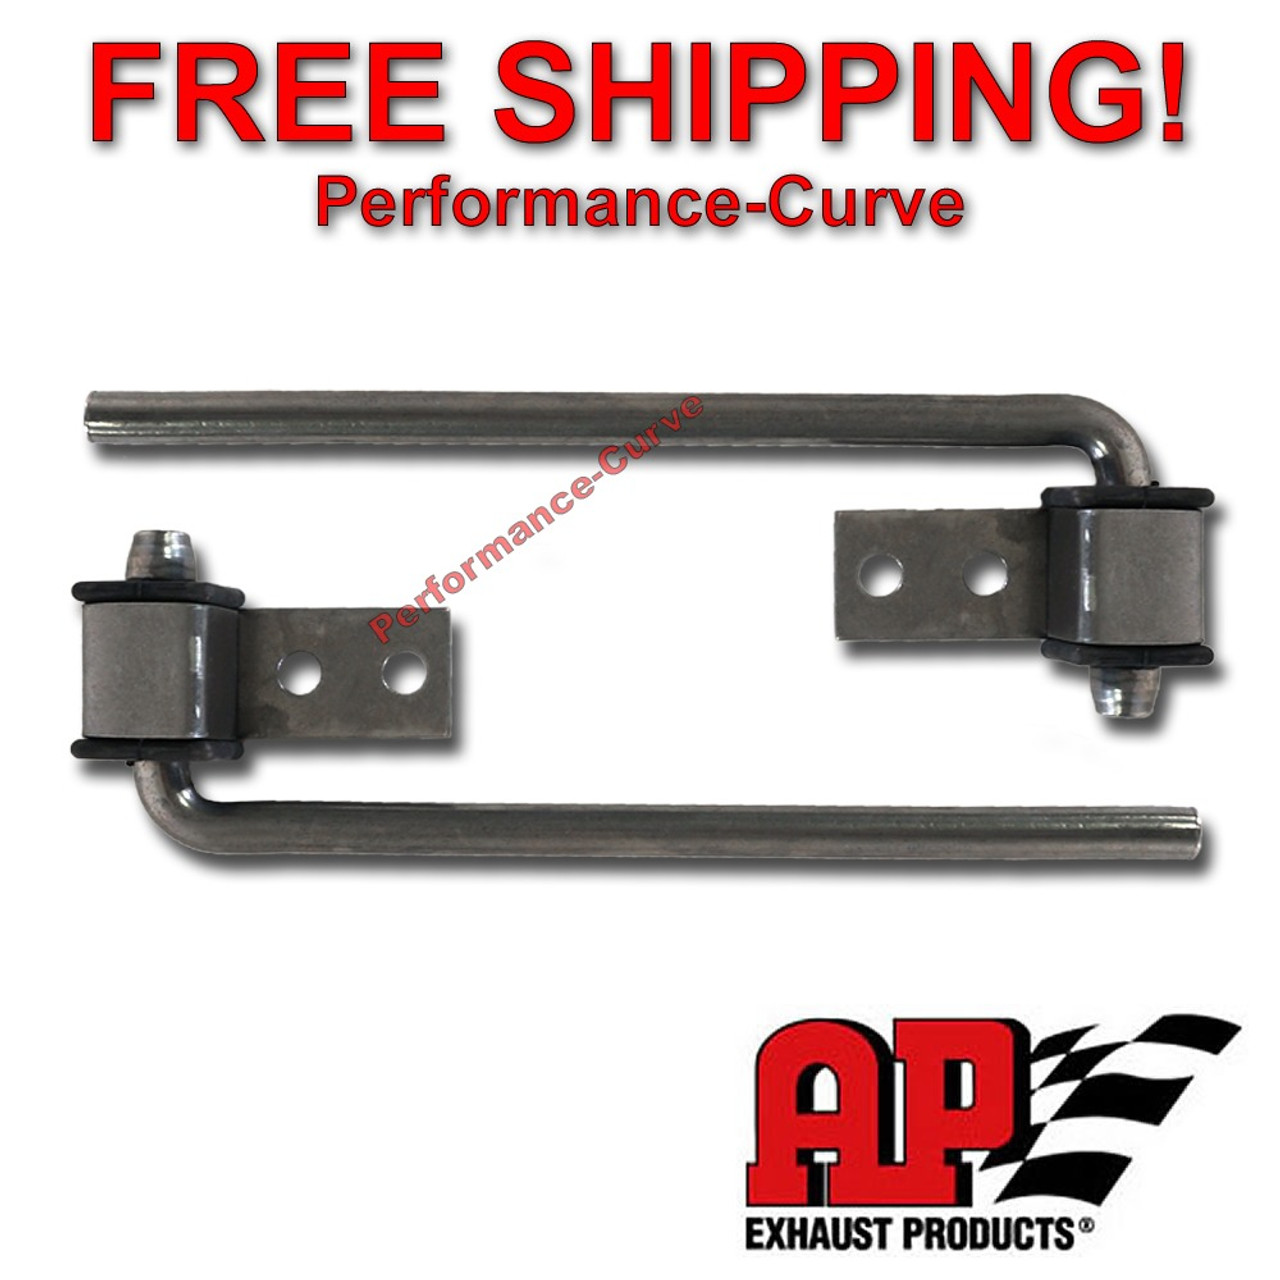 Universal Exhaust Hanger - Heavy Duty - 1/2 Rod - 10 Length (Qty 2) -  Performance-Curve